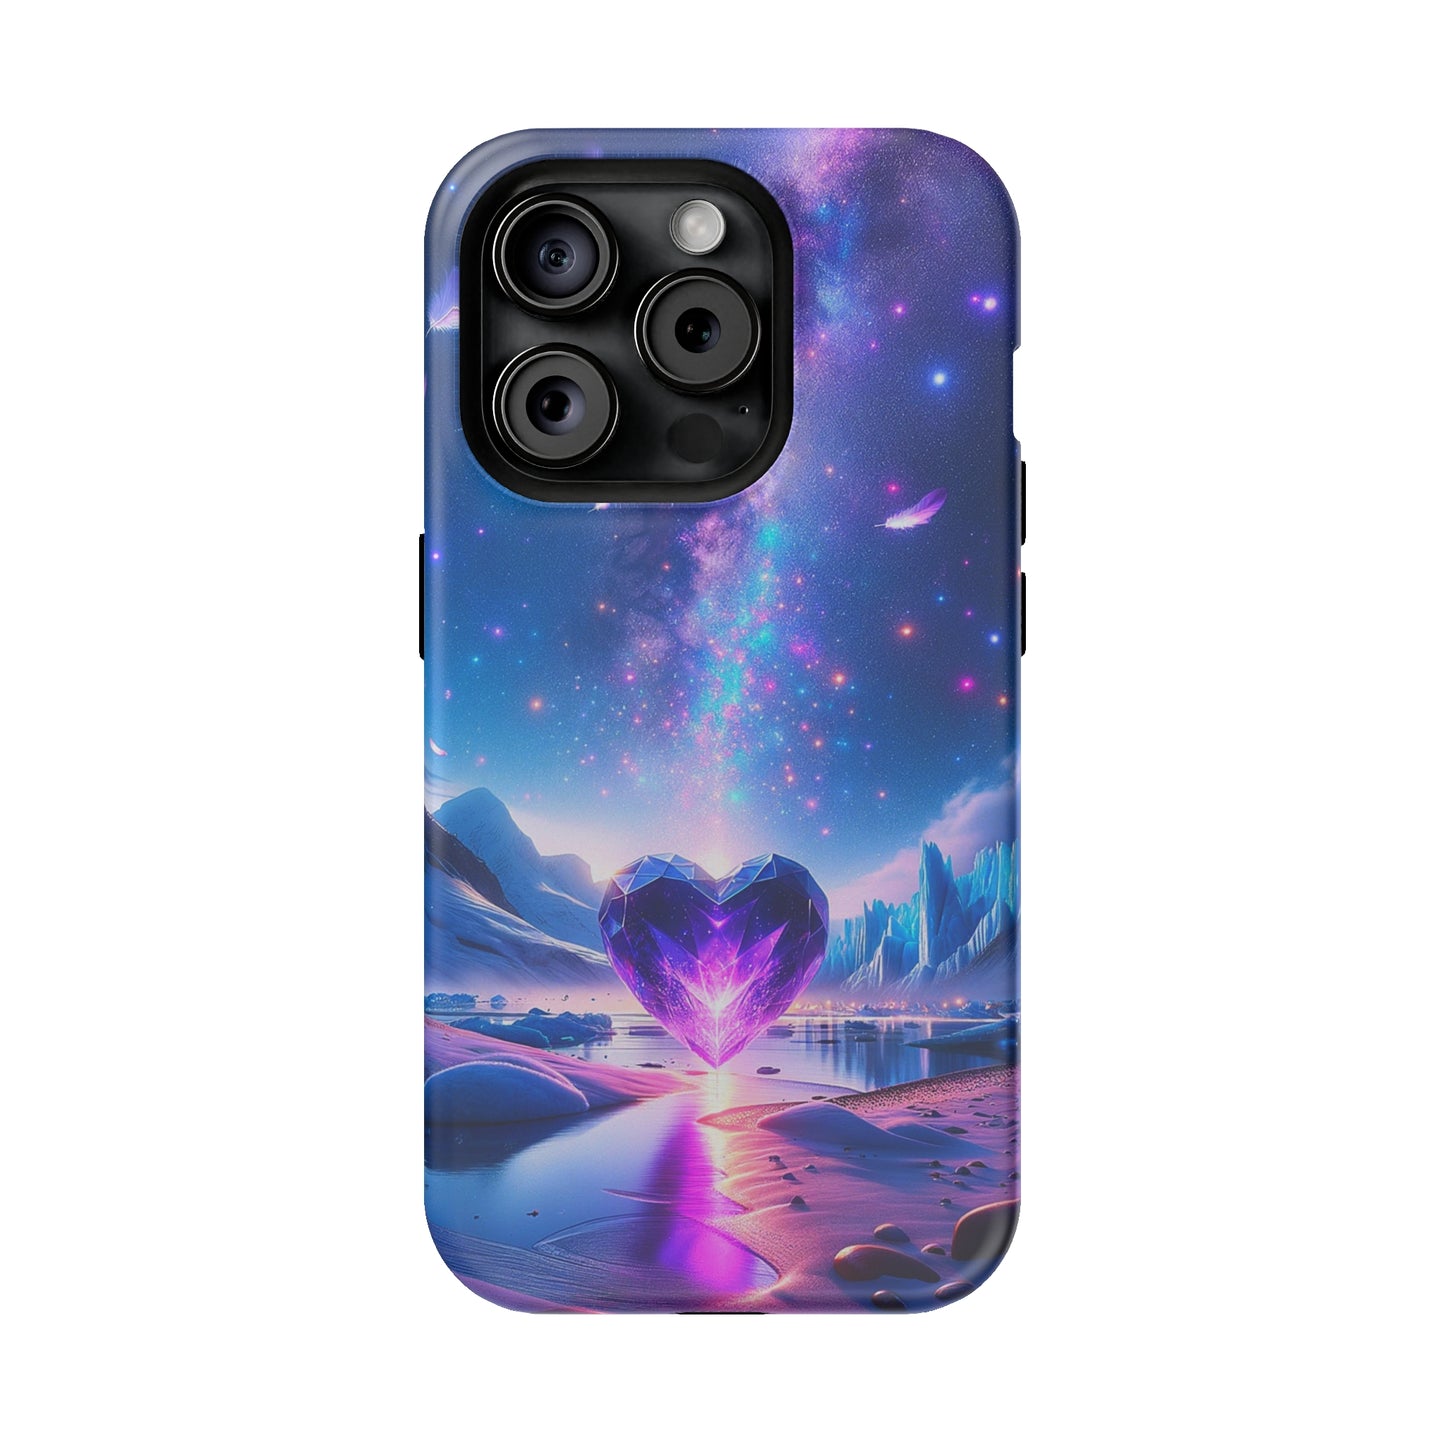 Galactic Heartbeat (iPhone MagSafe Case)Galactic Heartbeat MagSafe Durable Case: Style Meets Protection 📱✨
Upgrade your device with Rima Gallery's Galactic Heartbeat MagSafe Durable Case. This case isn’t RimaGallery